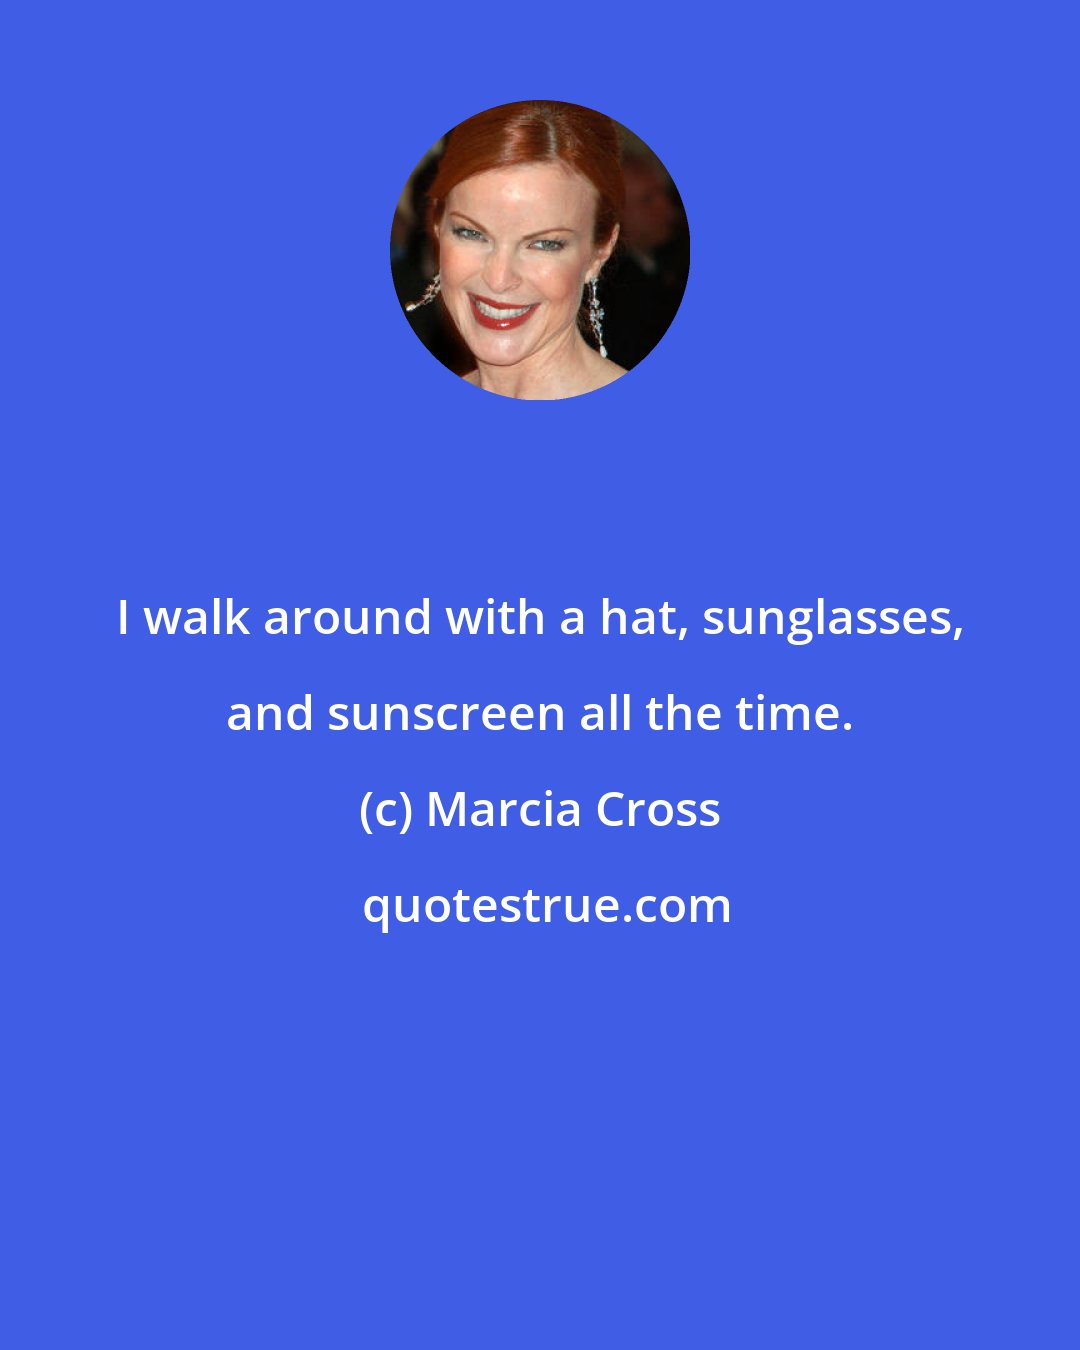 Marcia Cross: I walk around with a hat, sunglasses, and sunscreen all the time.